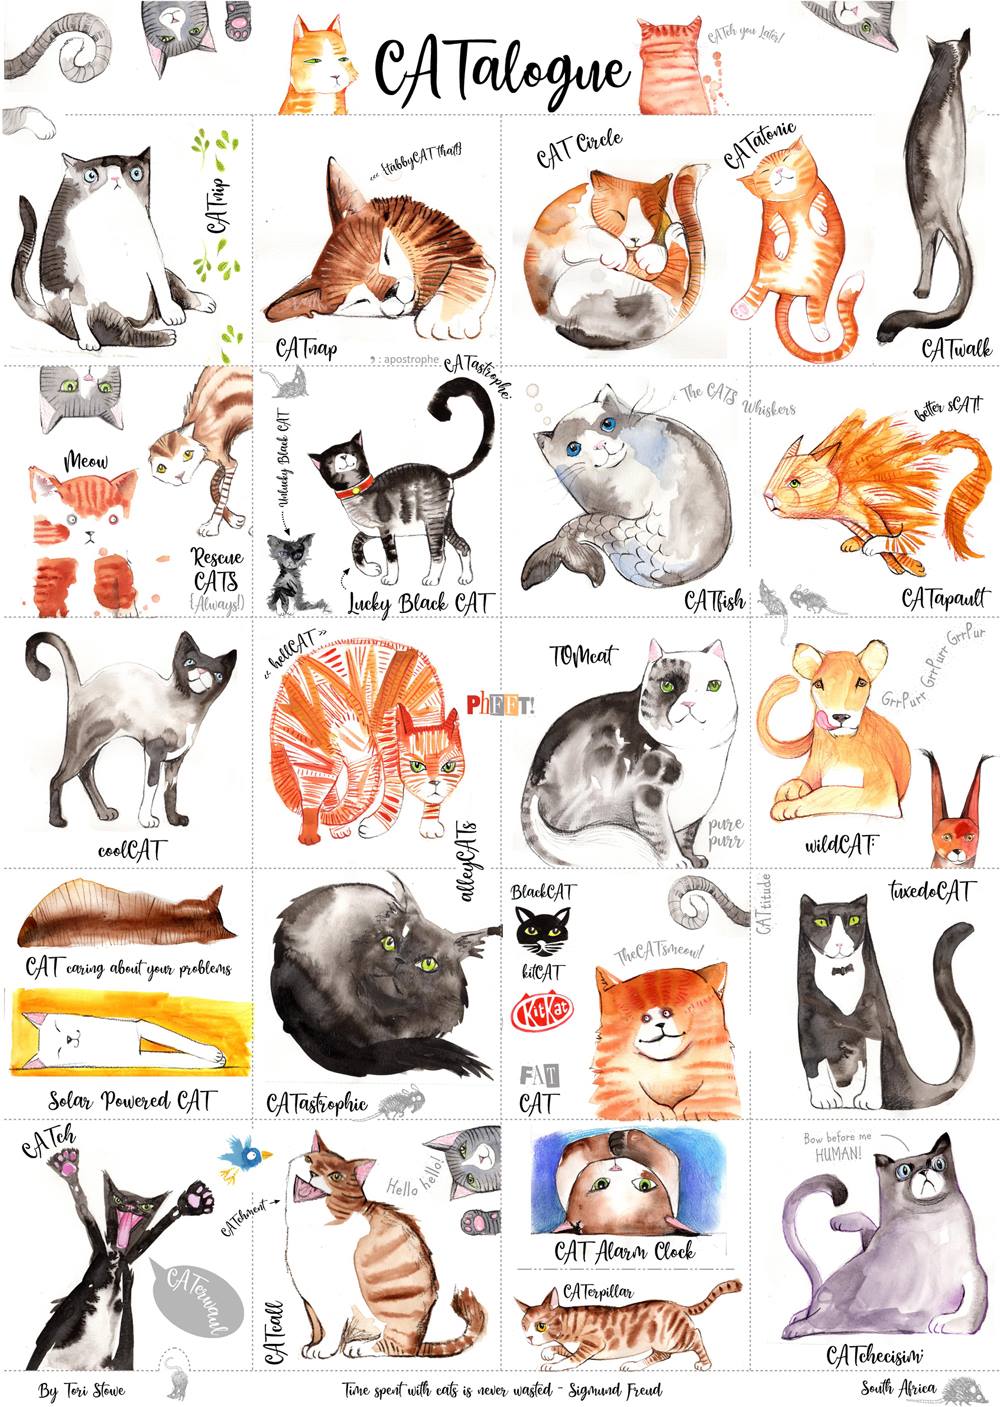 CATalogue: A poster of cats by Tori Stowe